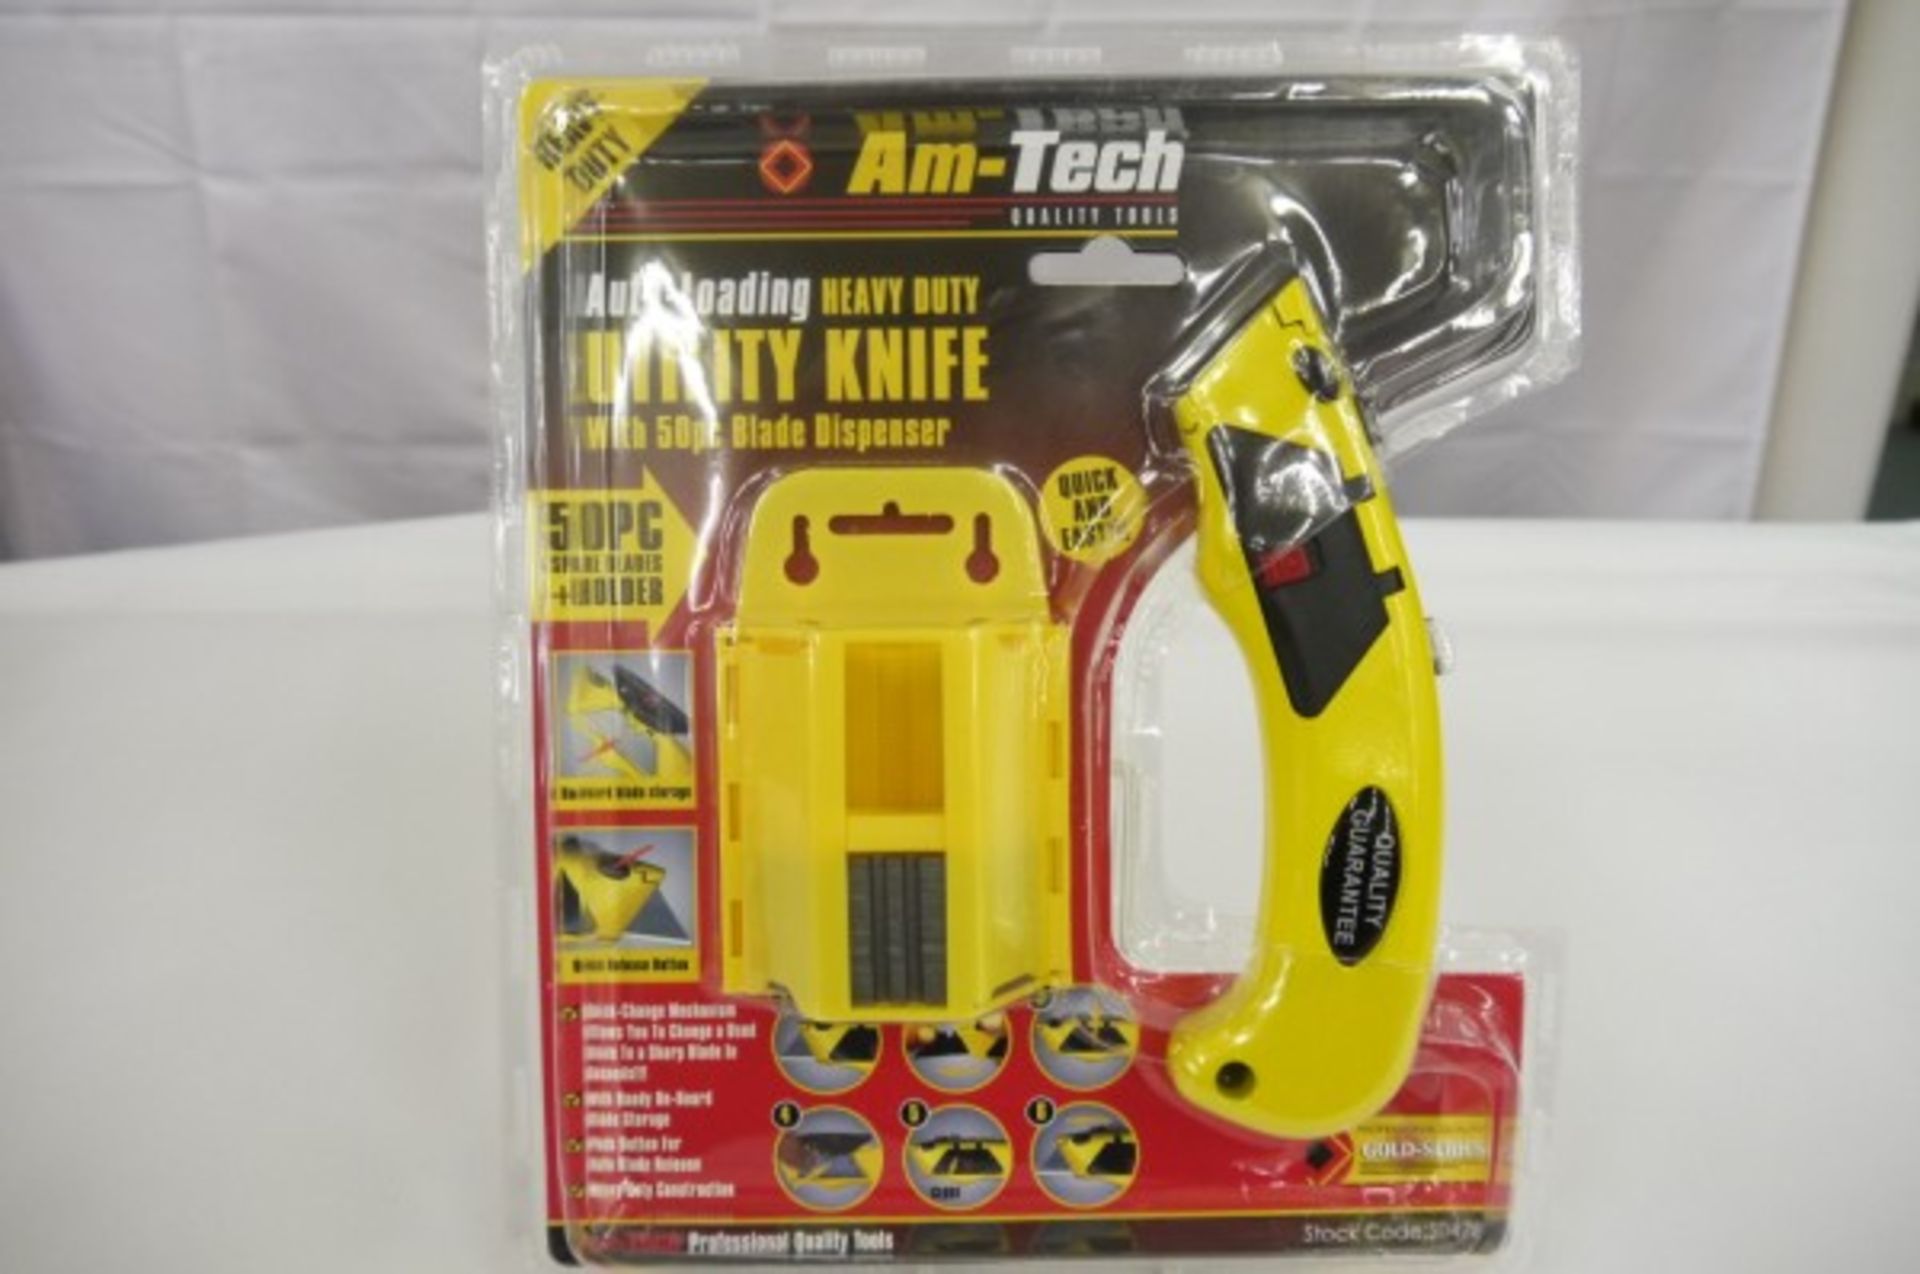 V *TRADE QTY* Brand New Auto Loading Utility With 50 Piece Blade Dispenser X 6 YOUR BID PRICE TO